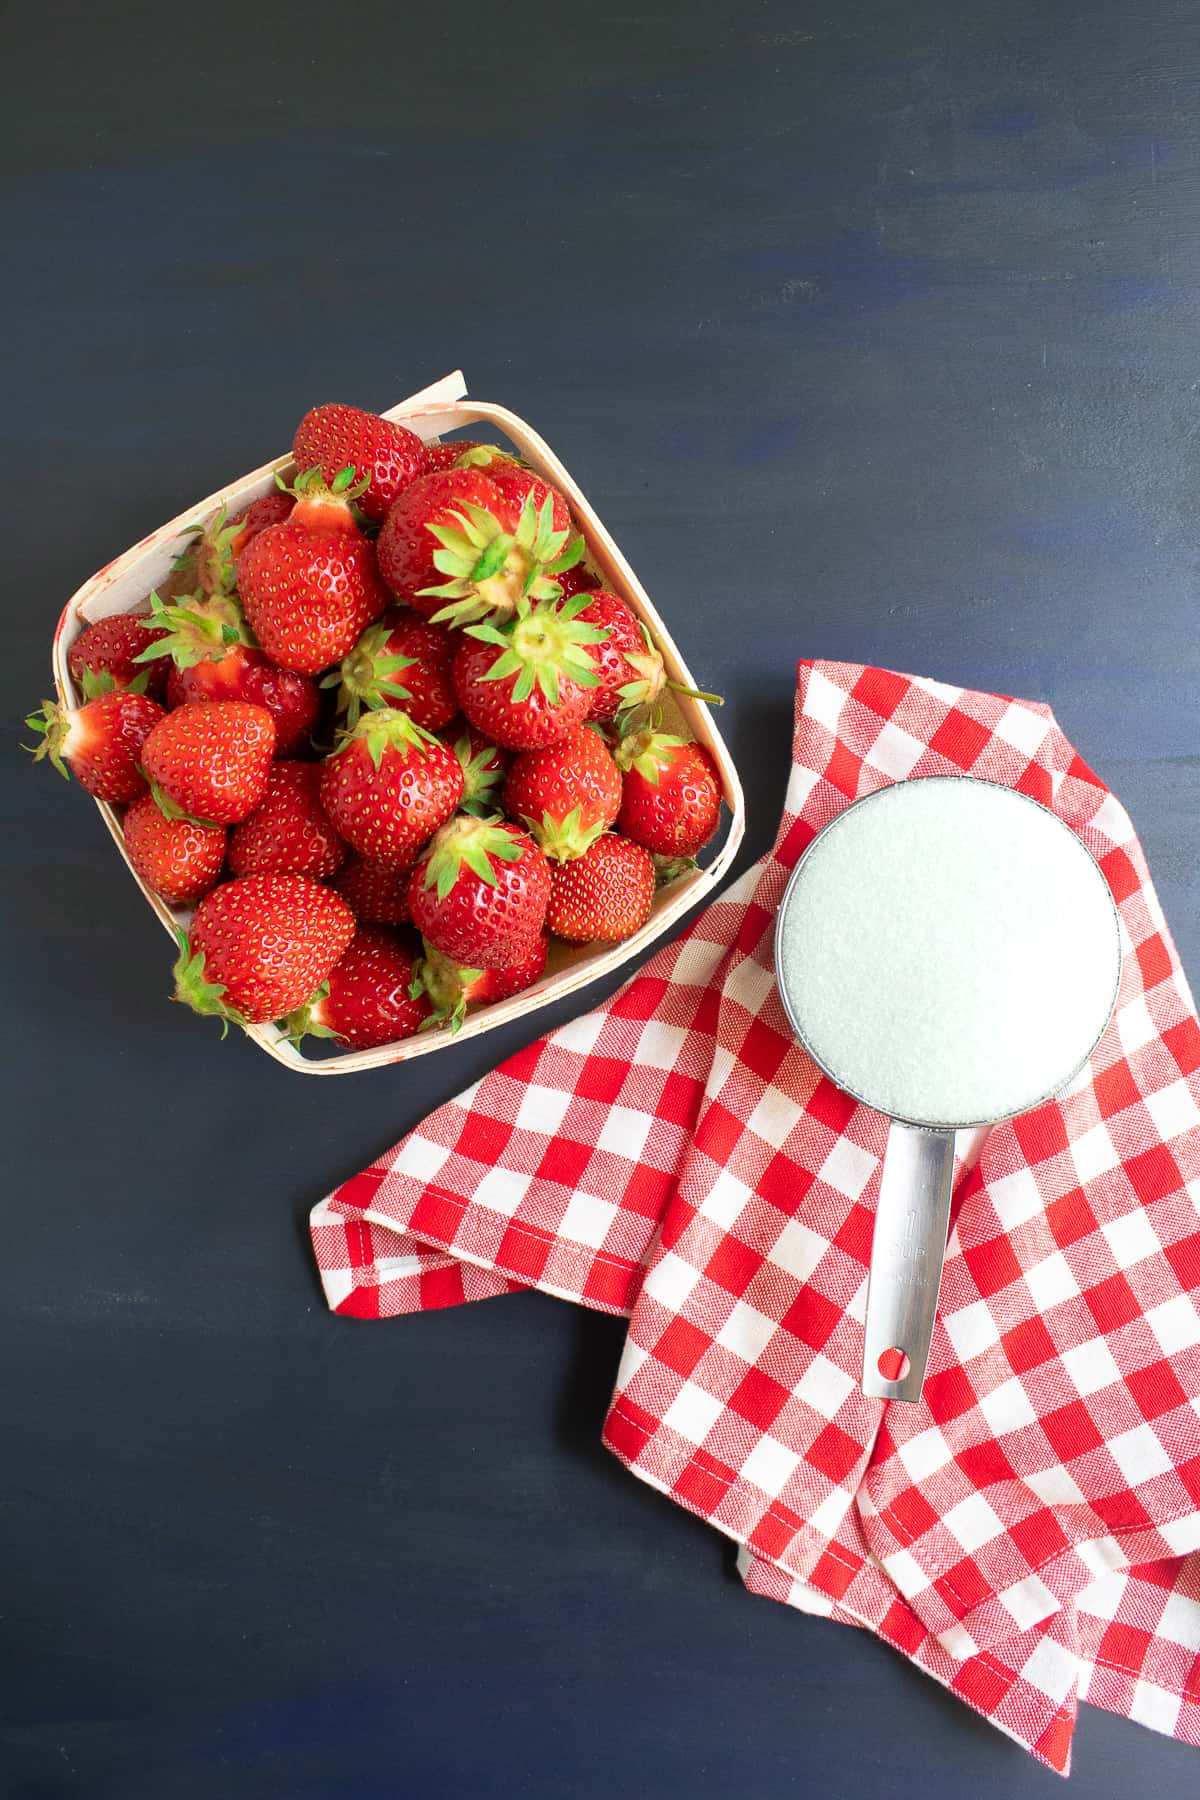 Fresh strawberries sit in a wooden basket alongside a cup of granulated sugar on a red and white checked napkin on a blue surface.